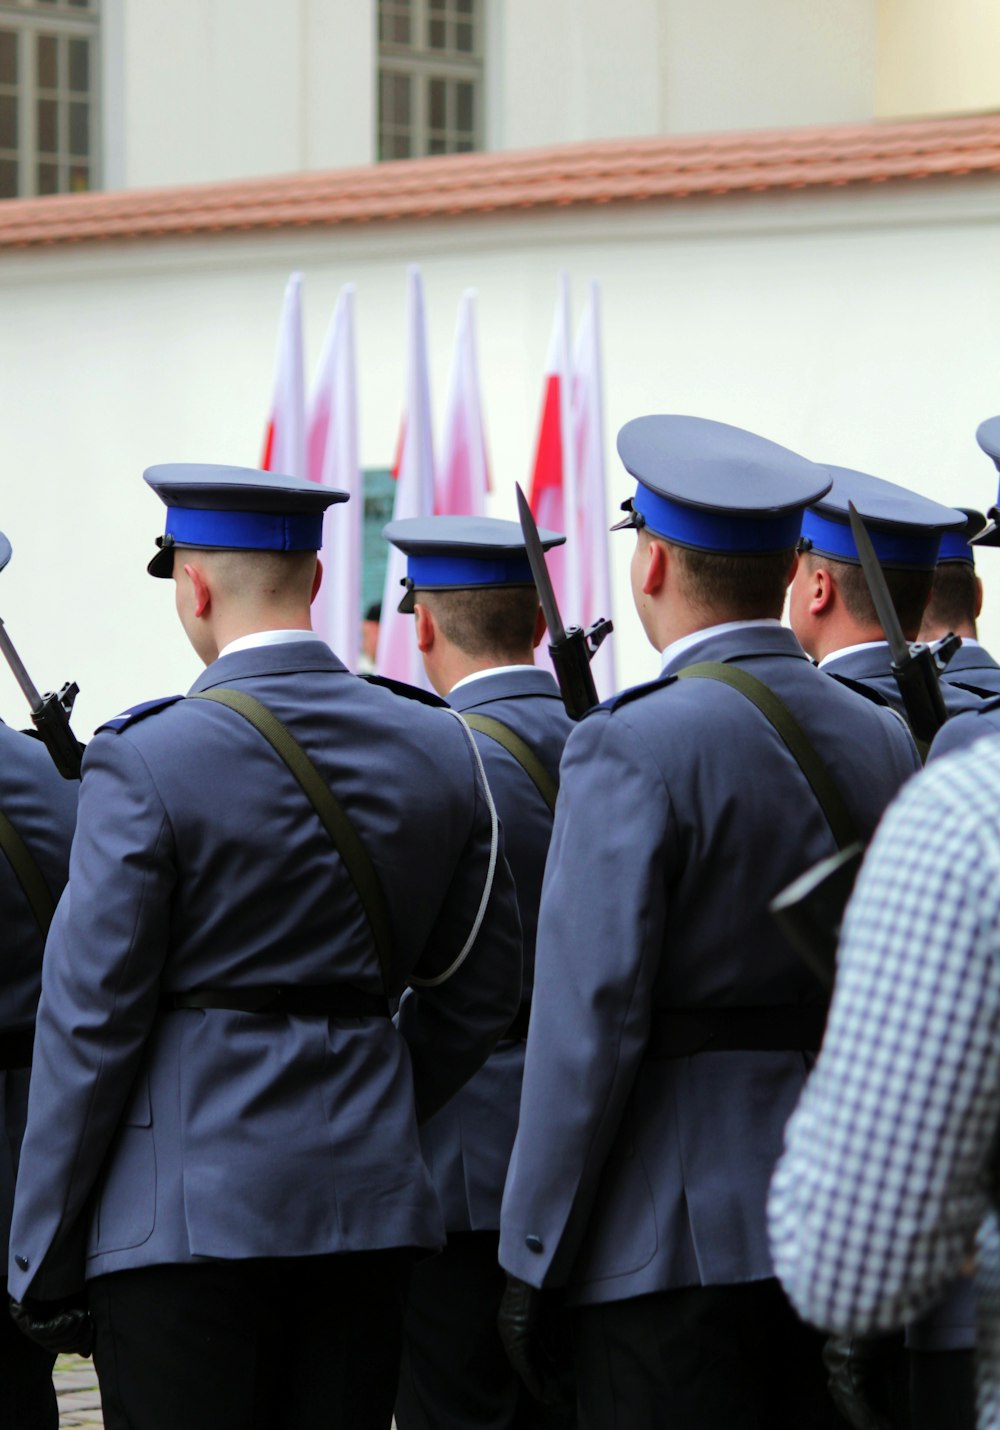 a group of uniformed men standing next to each other